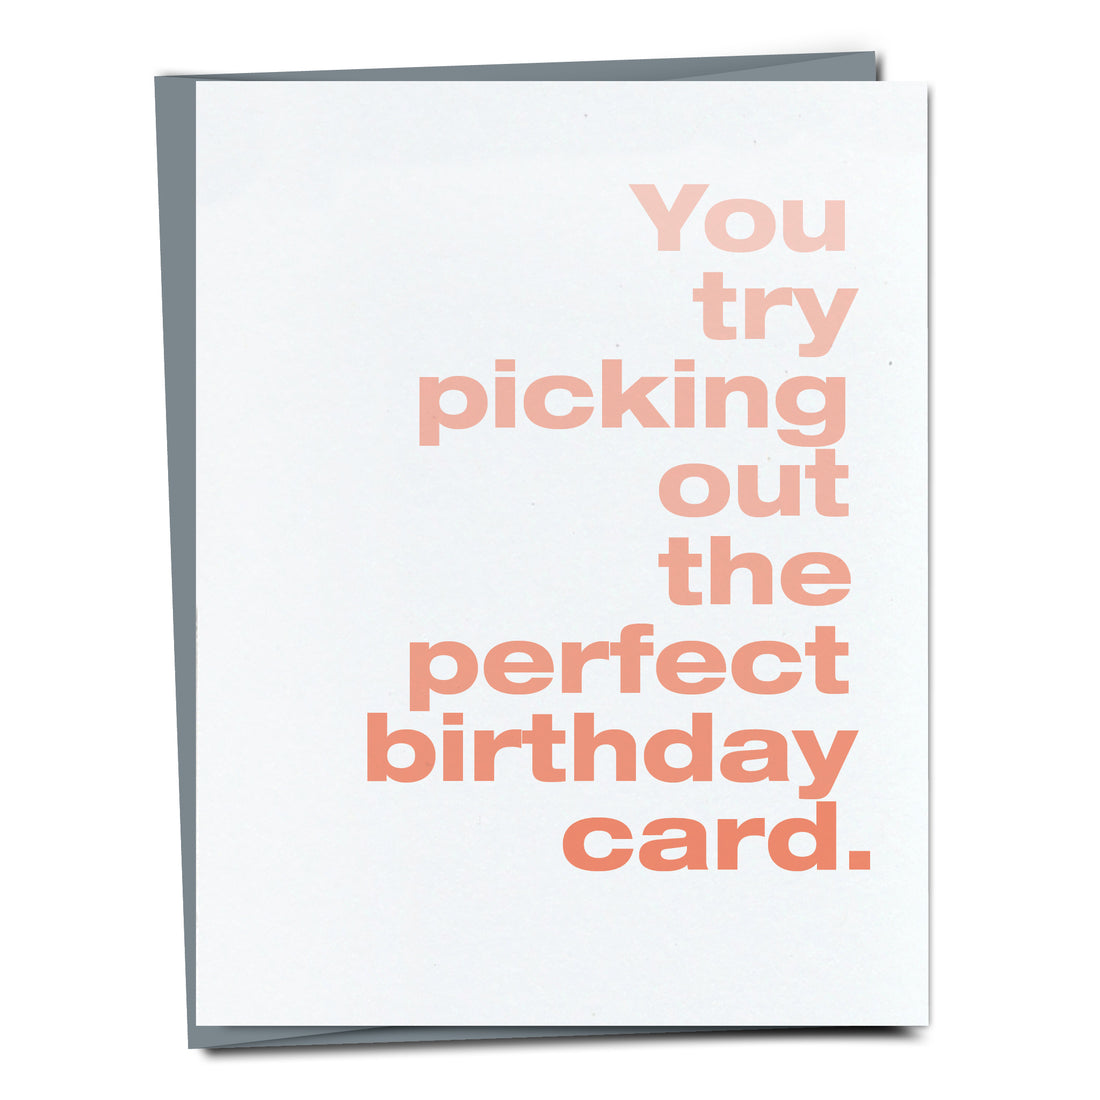 Try picking out the perfect birthday card